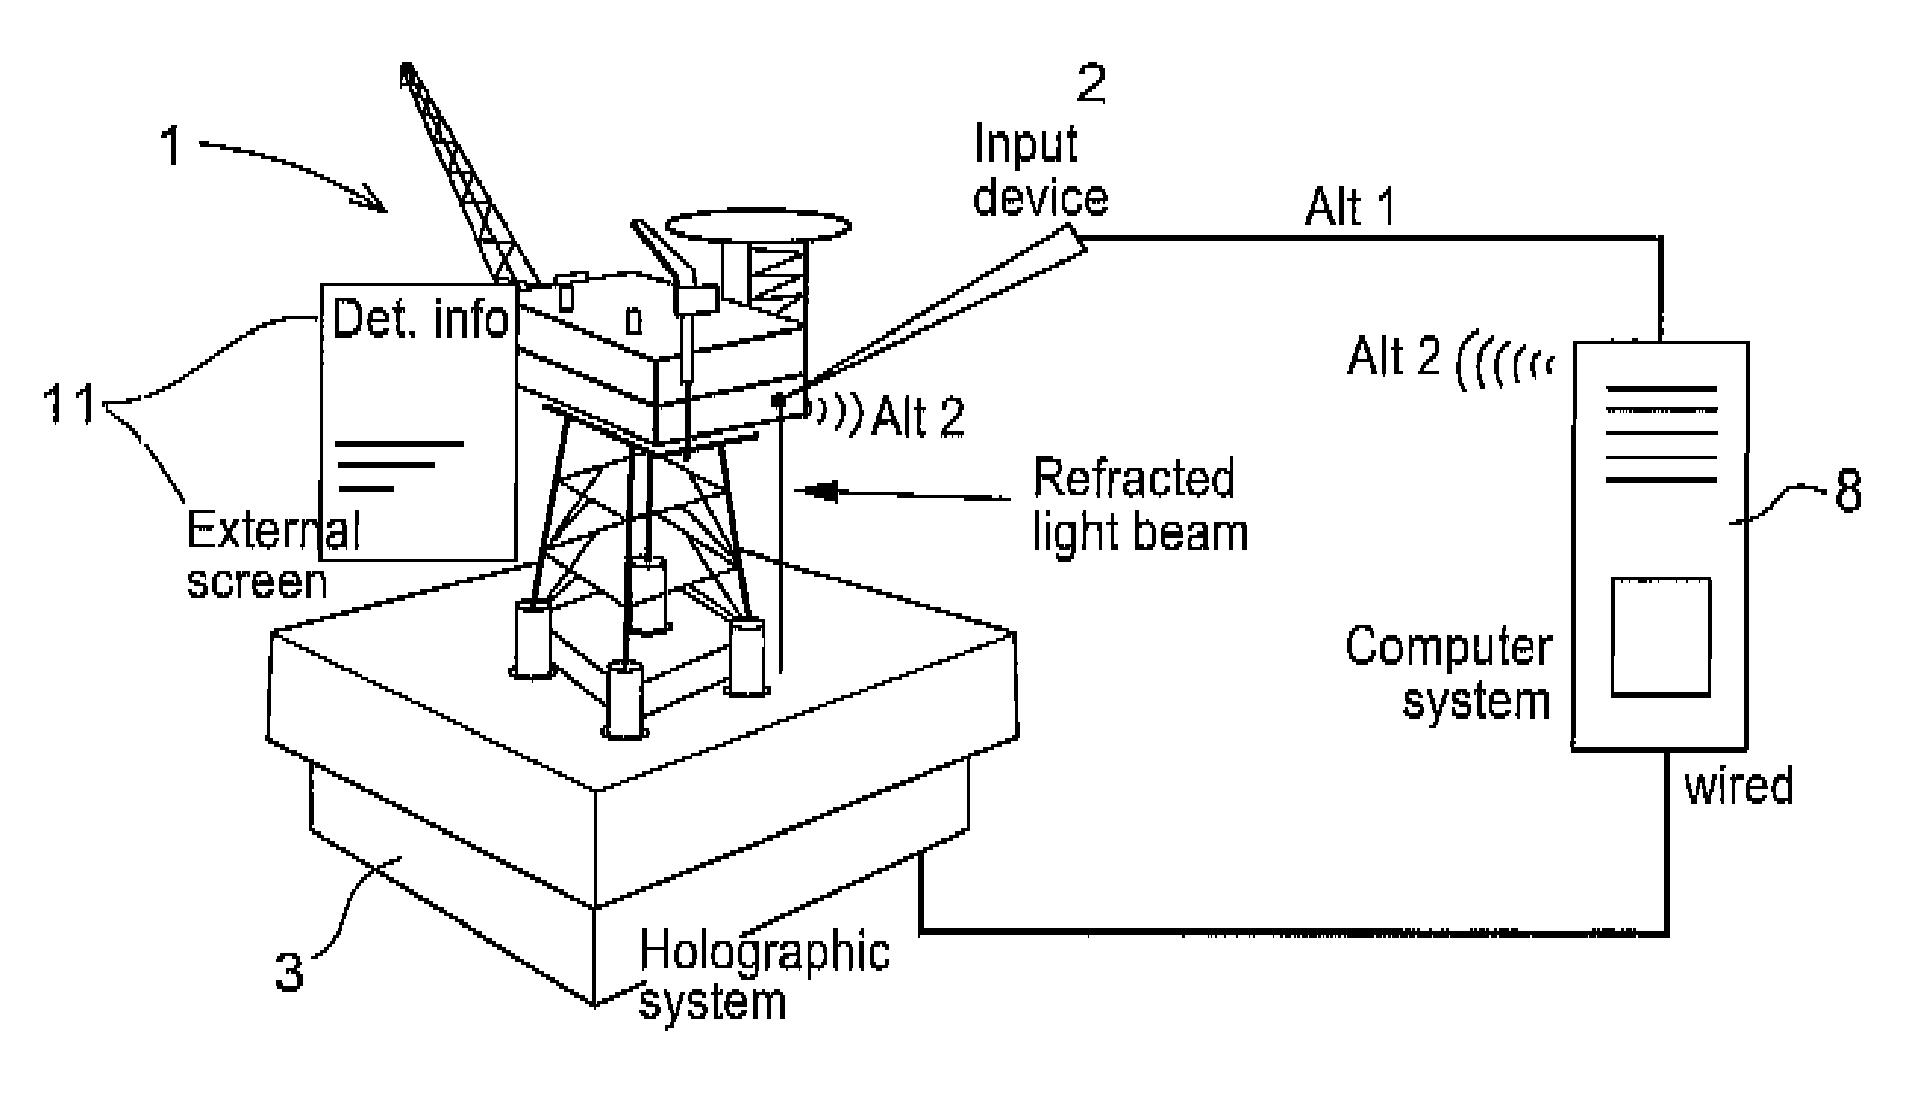 Computer implemented method to display technical data for monitoring an industrial installation